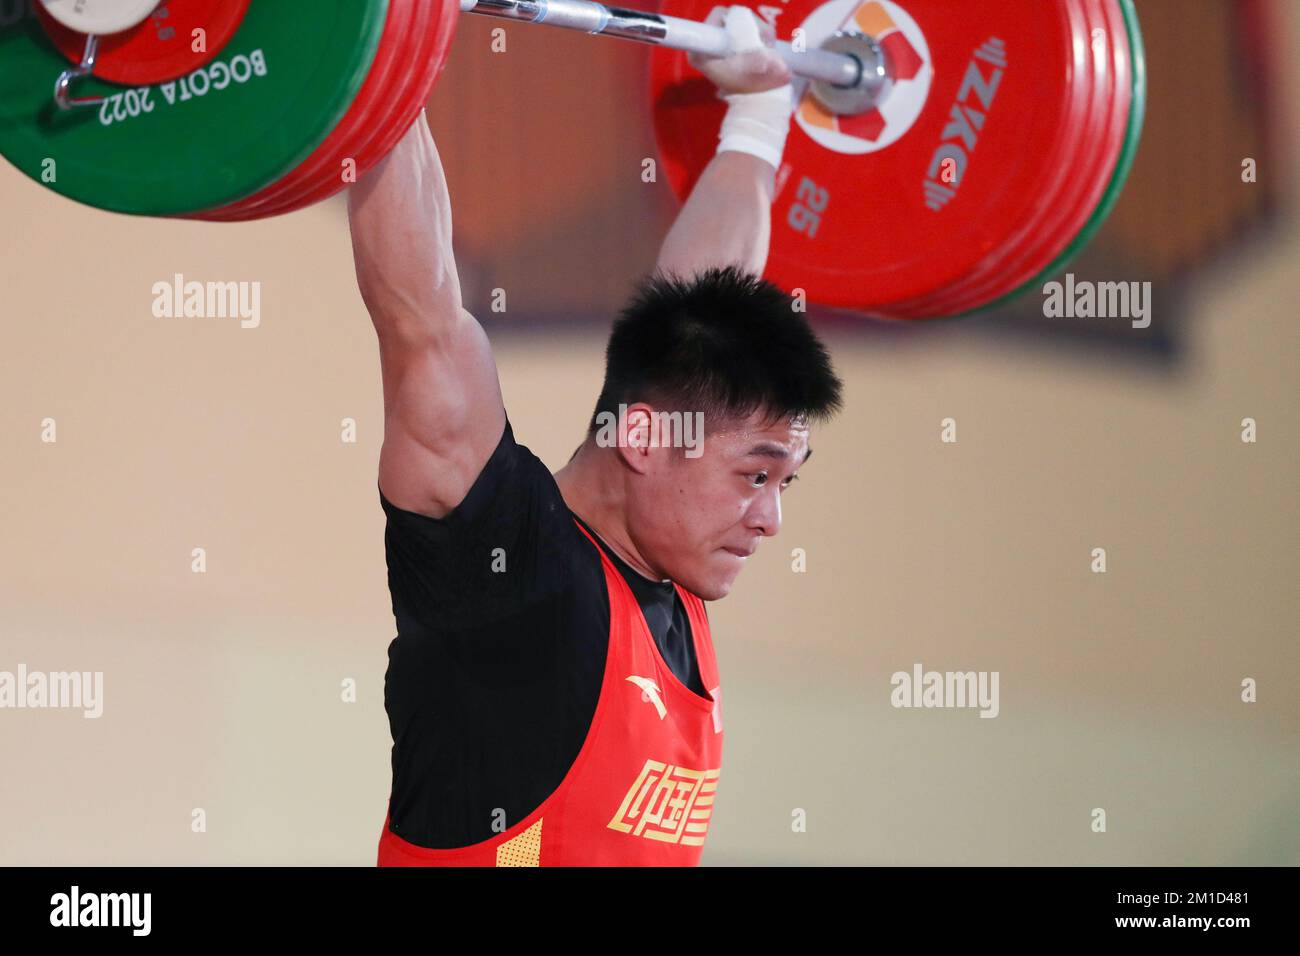 Bogota, Colombia. 11th Dec, 2022. Li Dayin of China competes during the mens 81kg clean and jerk event at the 2022 World Weightlifting Championships in Bogota, Colombia, Dec